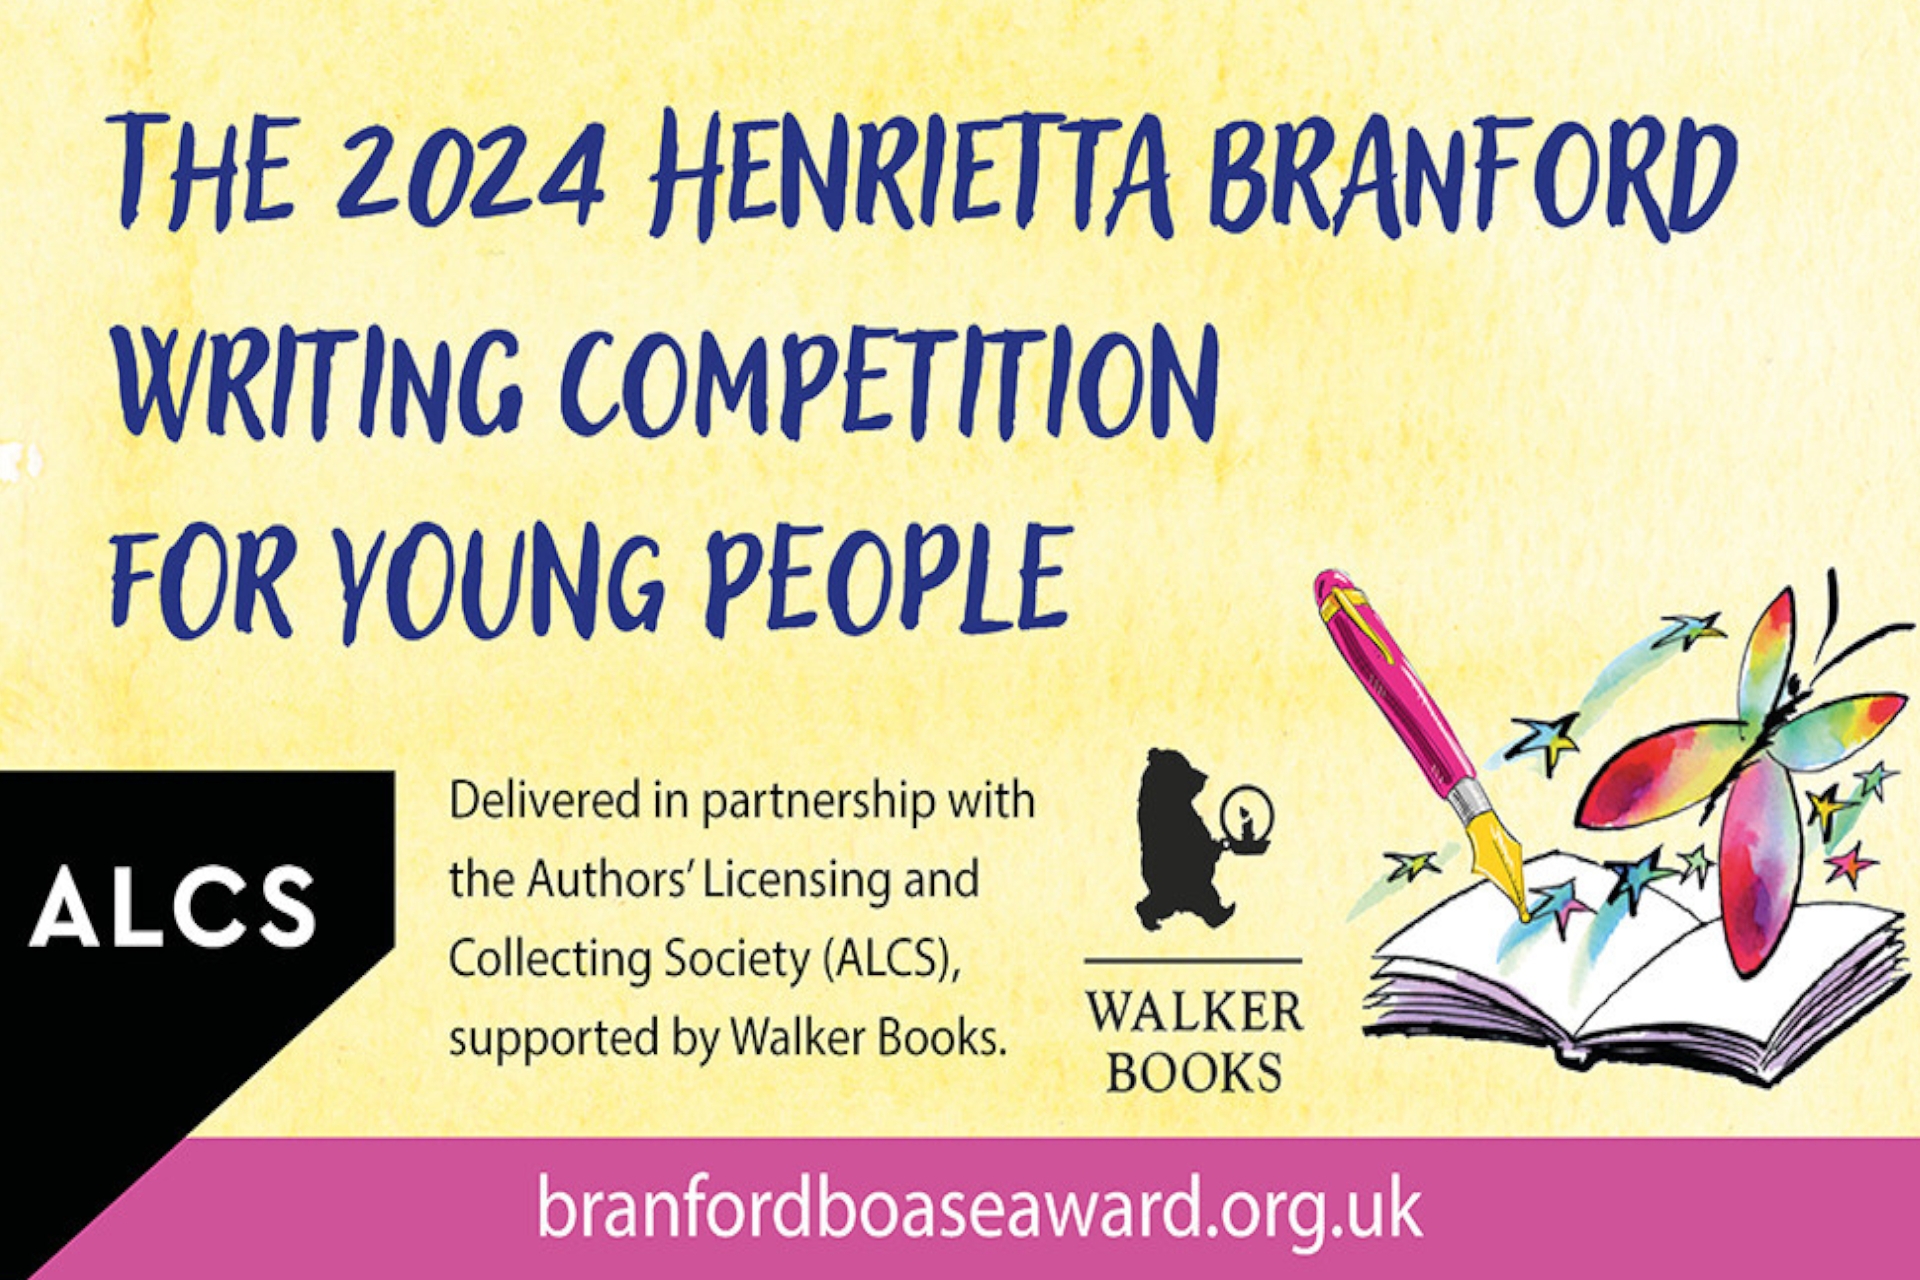 2024 Henrietta Branford Writing Competition is open for young people who enjoy writing stories!